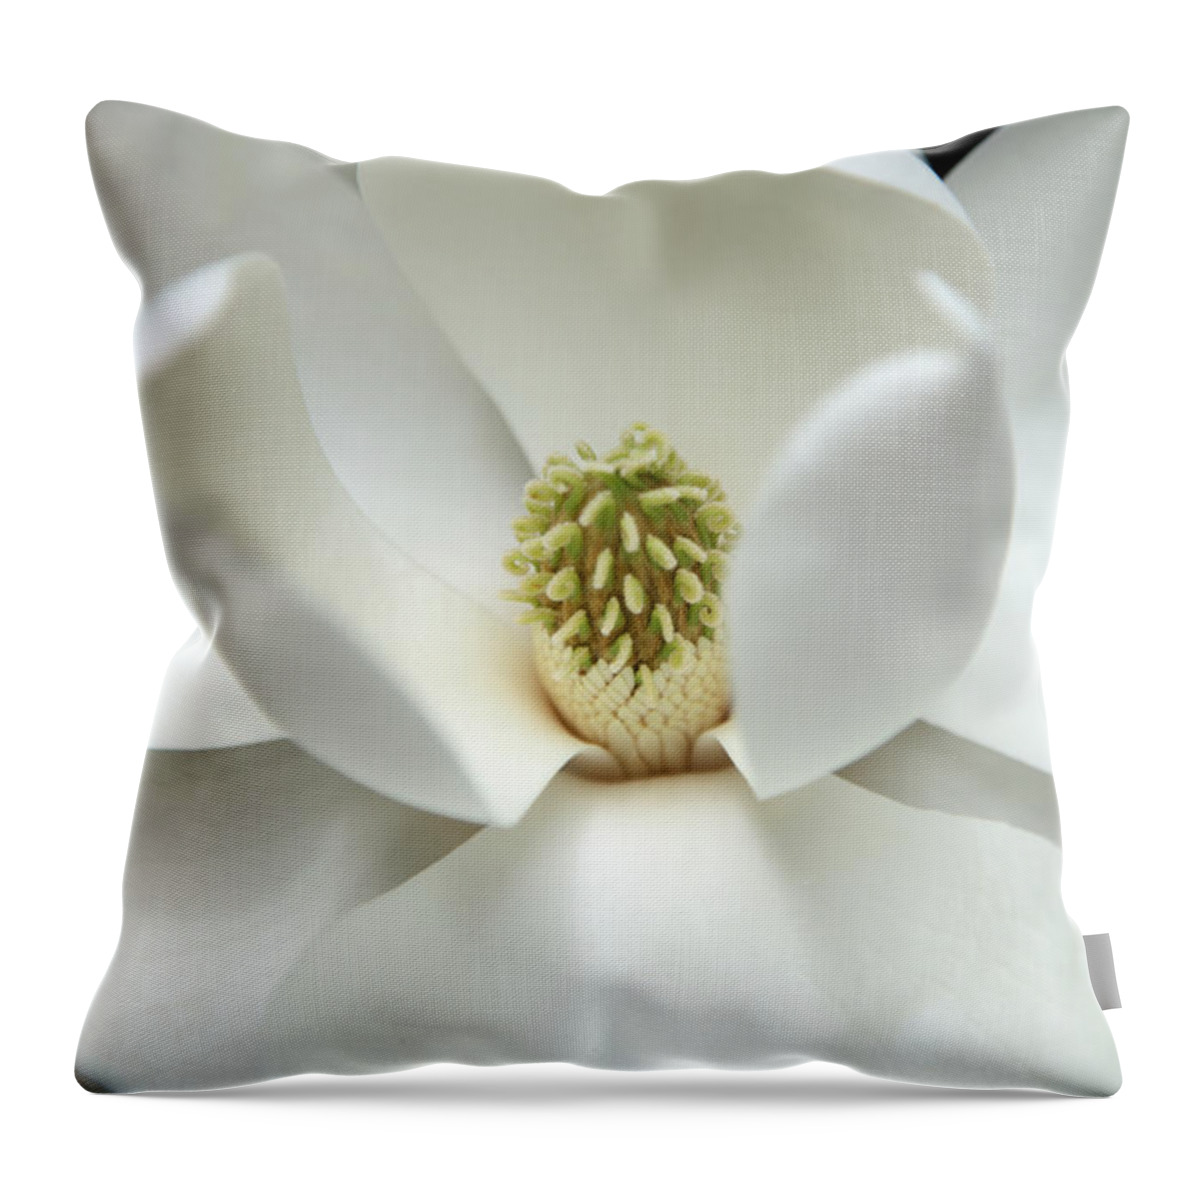 Magnolia Throw Pillow featuring the photograph Mysteriously by Amanda Barcon